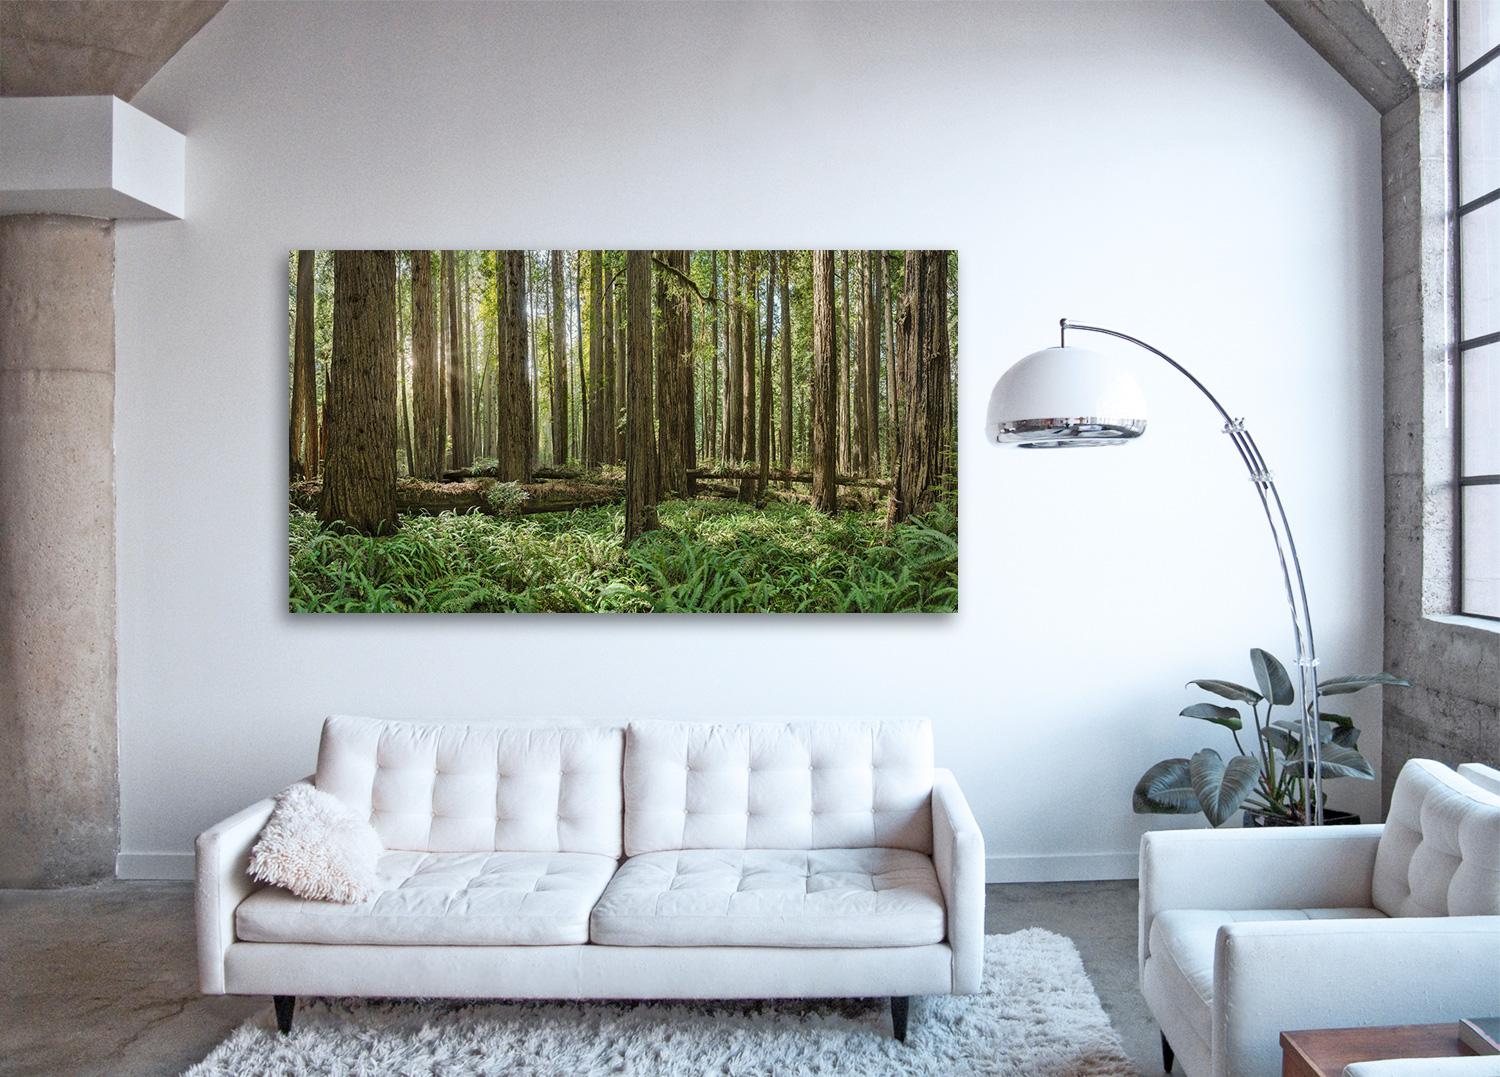 Redwoods Study II - large format observation panorama of green redwoods forest - Photograph by Erik Pawassar